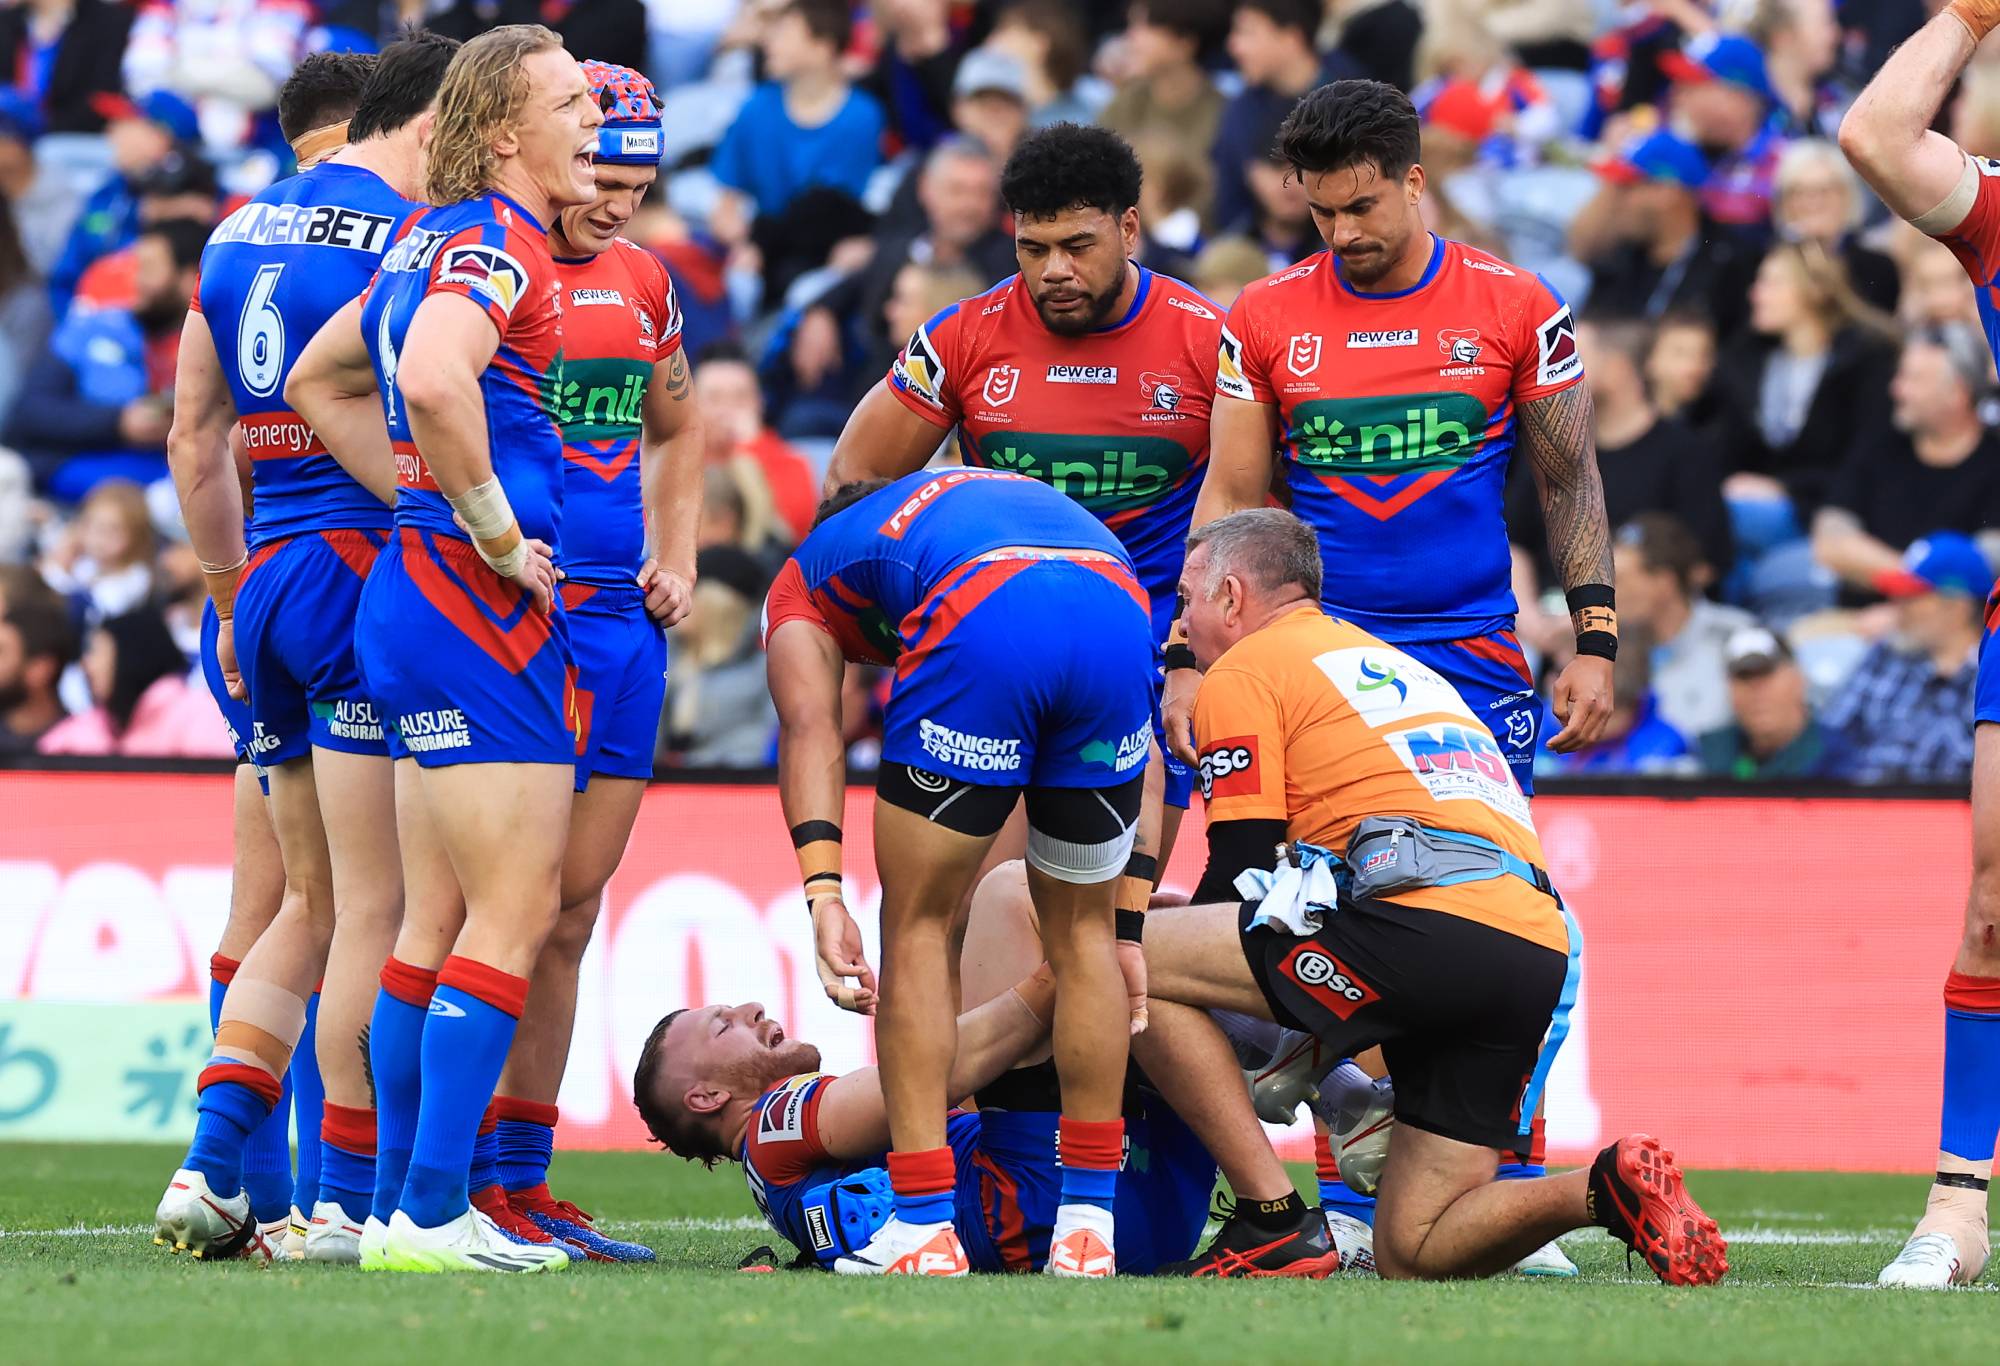 NEWCASTLE, AUSTRALIA - AUGUST 13: Jackson Hastings of the Knights is injured during the round 24 NRL match between Newcastle Knights and Canterbury Bulldogs at McDonald Jones Stadium on August 13, 2023 in Newcastle, Australia. (Photo by Jenny Evans/Getty Images)